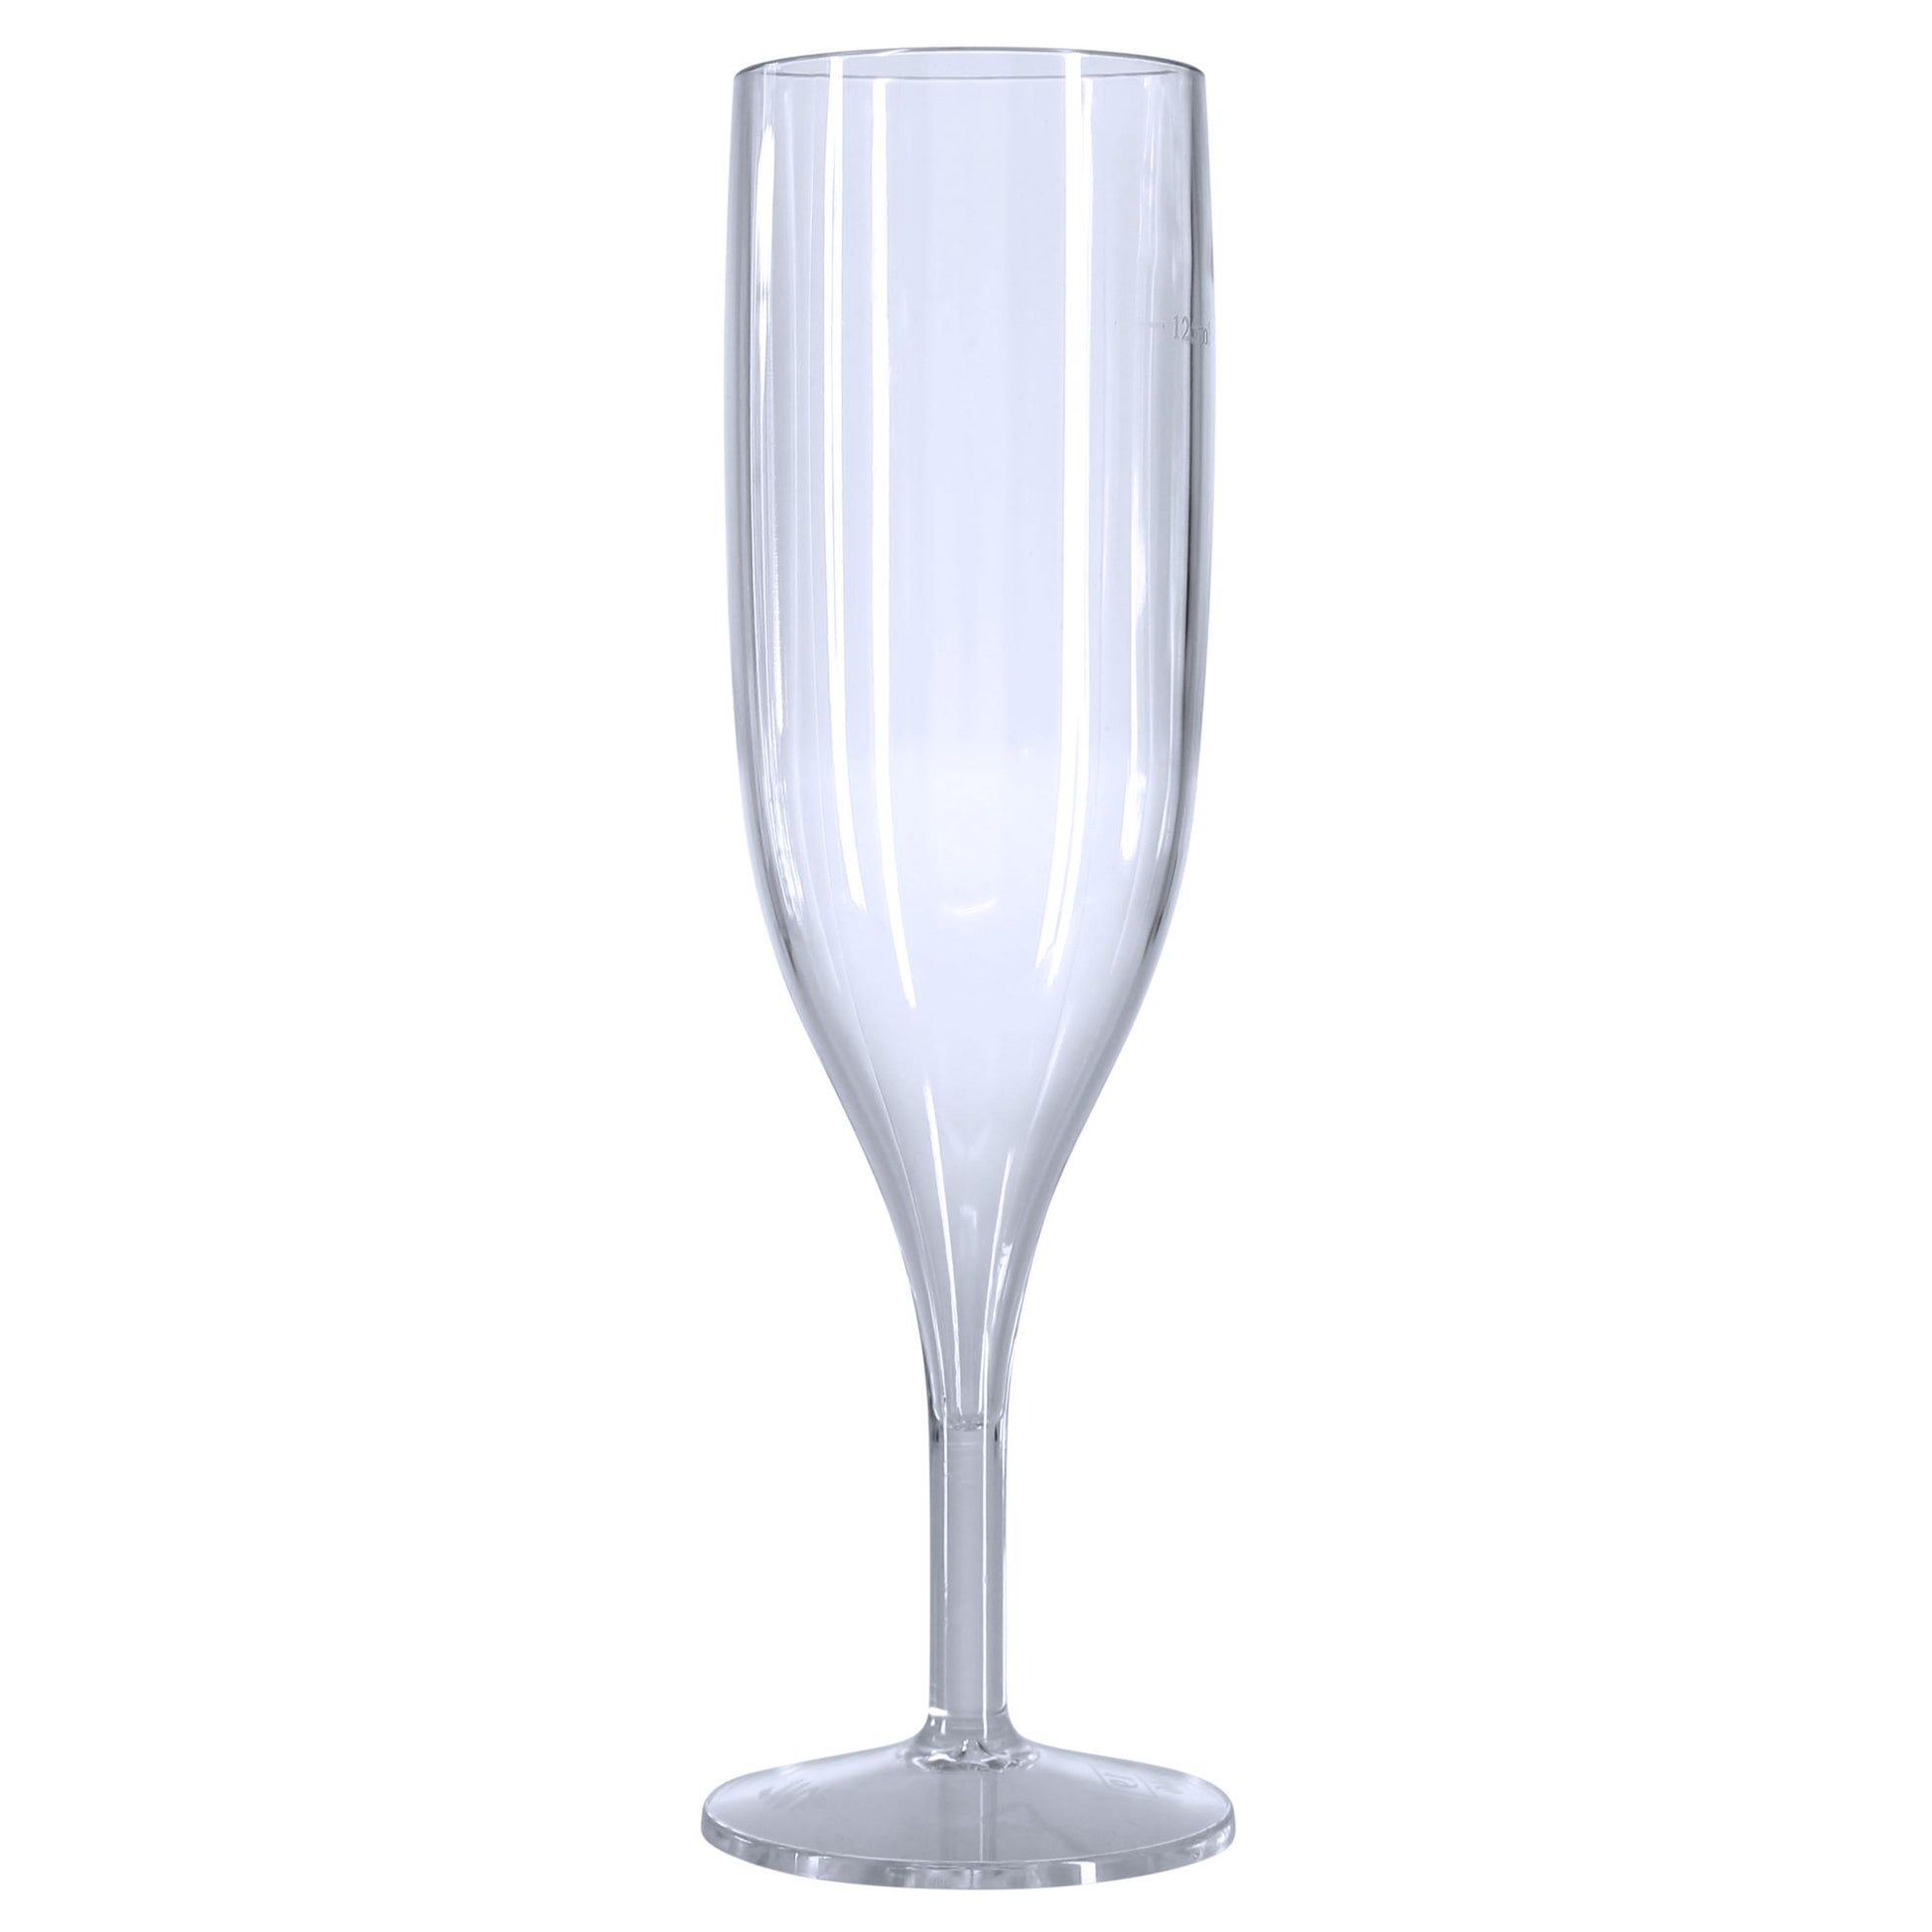 4 x Clear Prosecco Flutes – 175ml CE 125ml marked, made from Strong Reusable Plastic in glossy Transparent 1-Piece Champagne Glass Pack-5056020186922-EY-PP-125-Product Pro-Clear Champagne Flutes, Clear Flutes, Clear Prosecco Flutes, Reusable Flutes